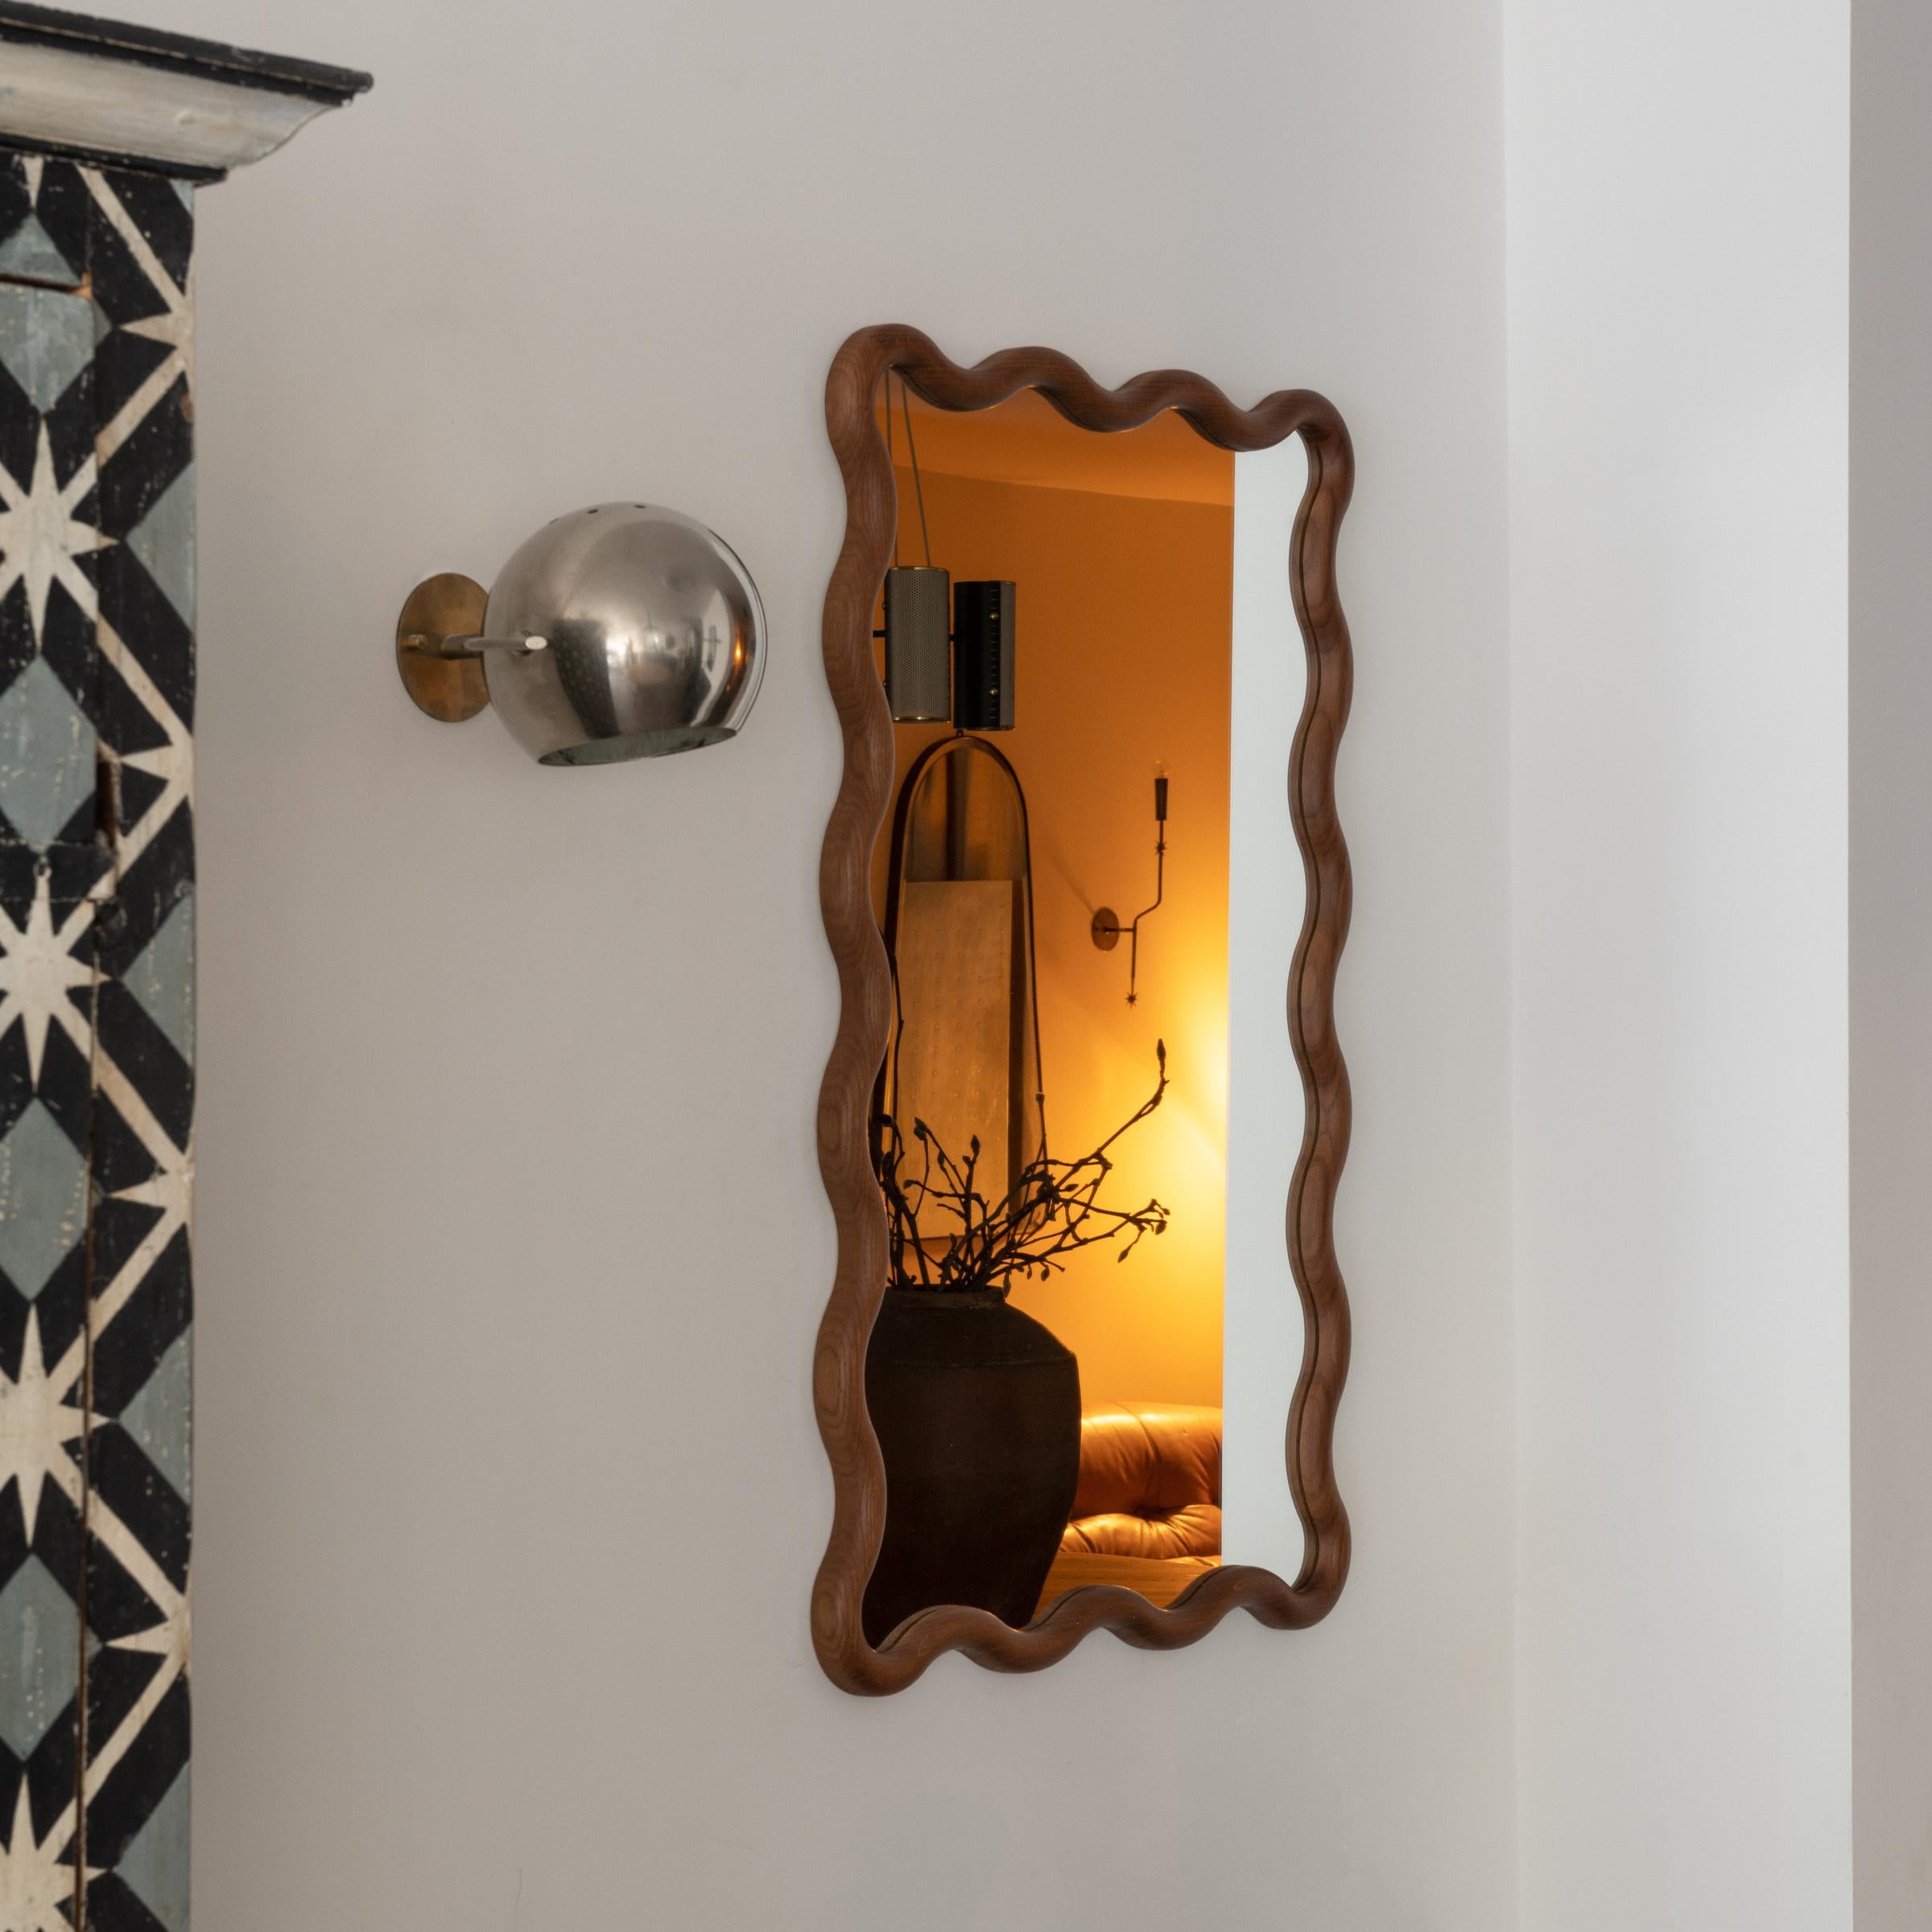 Italian oak mirror based on a 1940's design. Hand made in Milan, Italy. 

Available in different finishes.